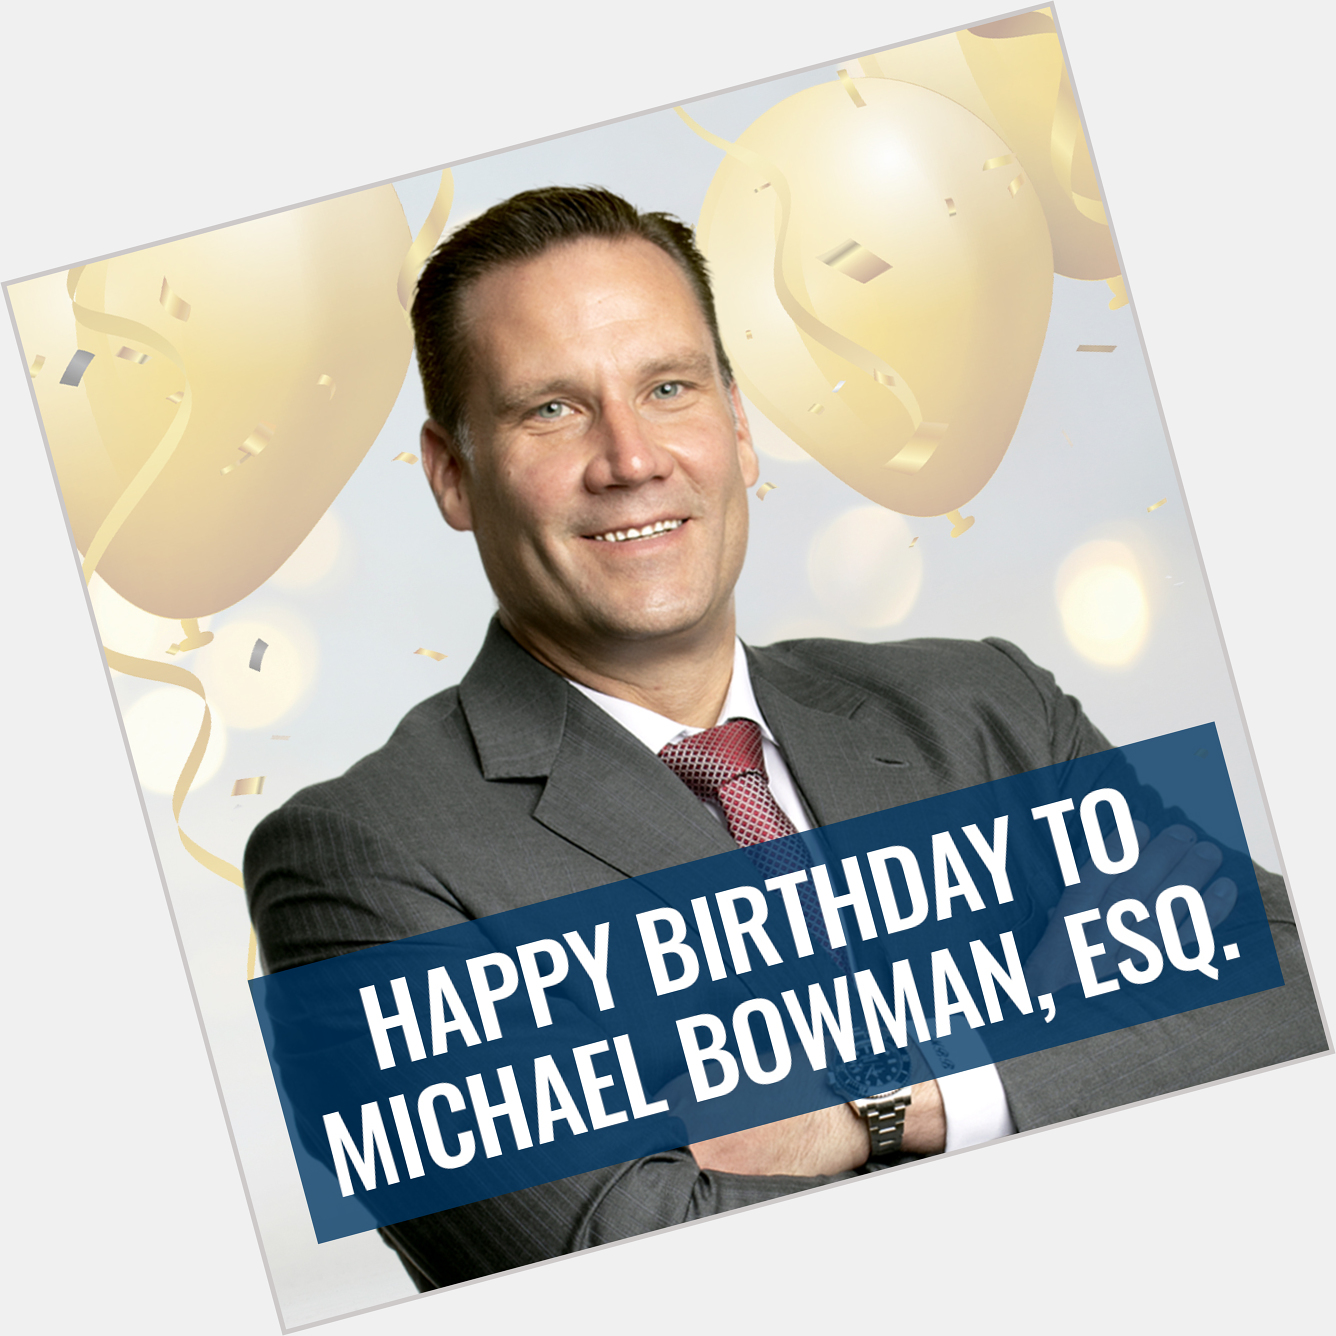 We would like to wish a happy birthday to one of our partners, Michael Bowman, Esq.!    